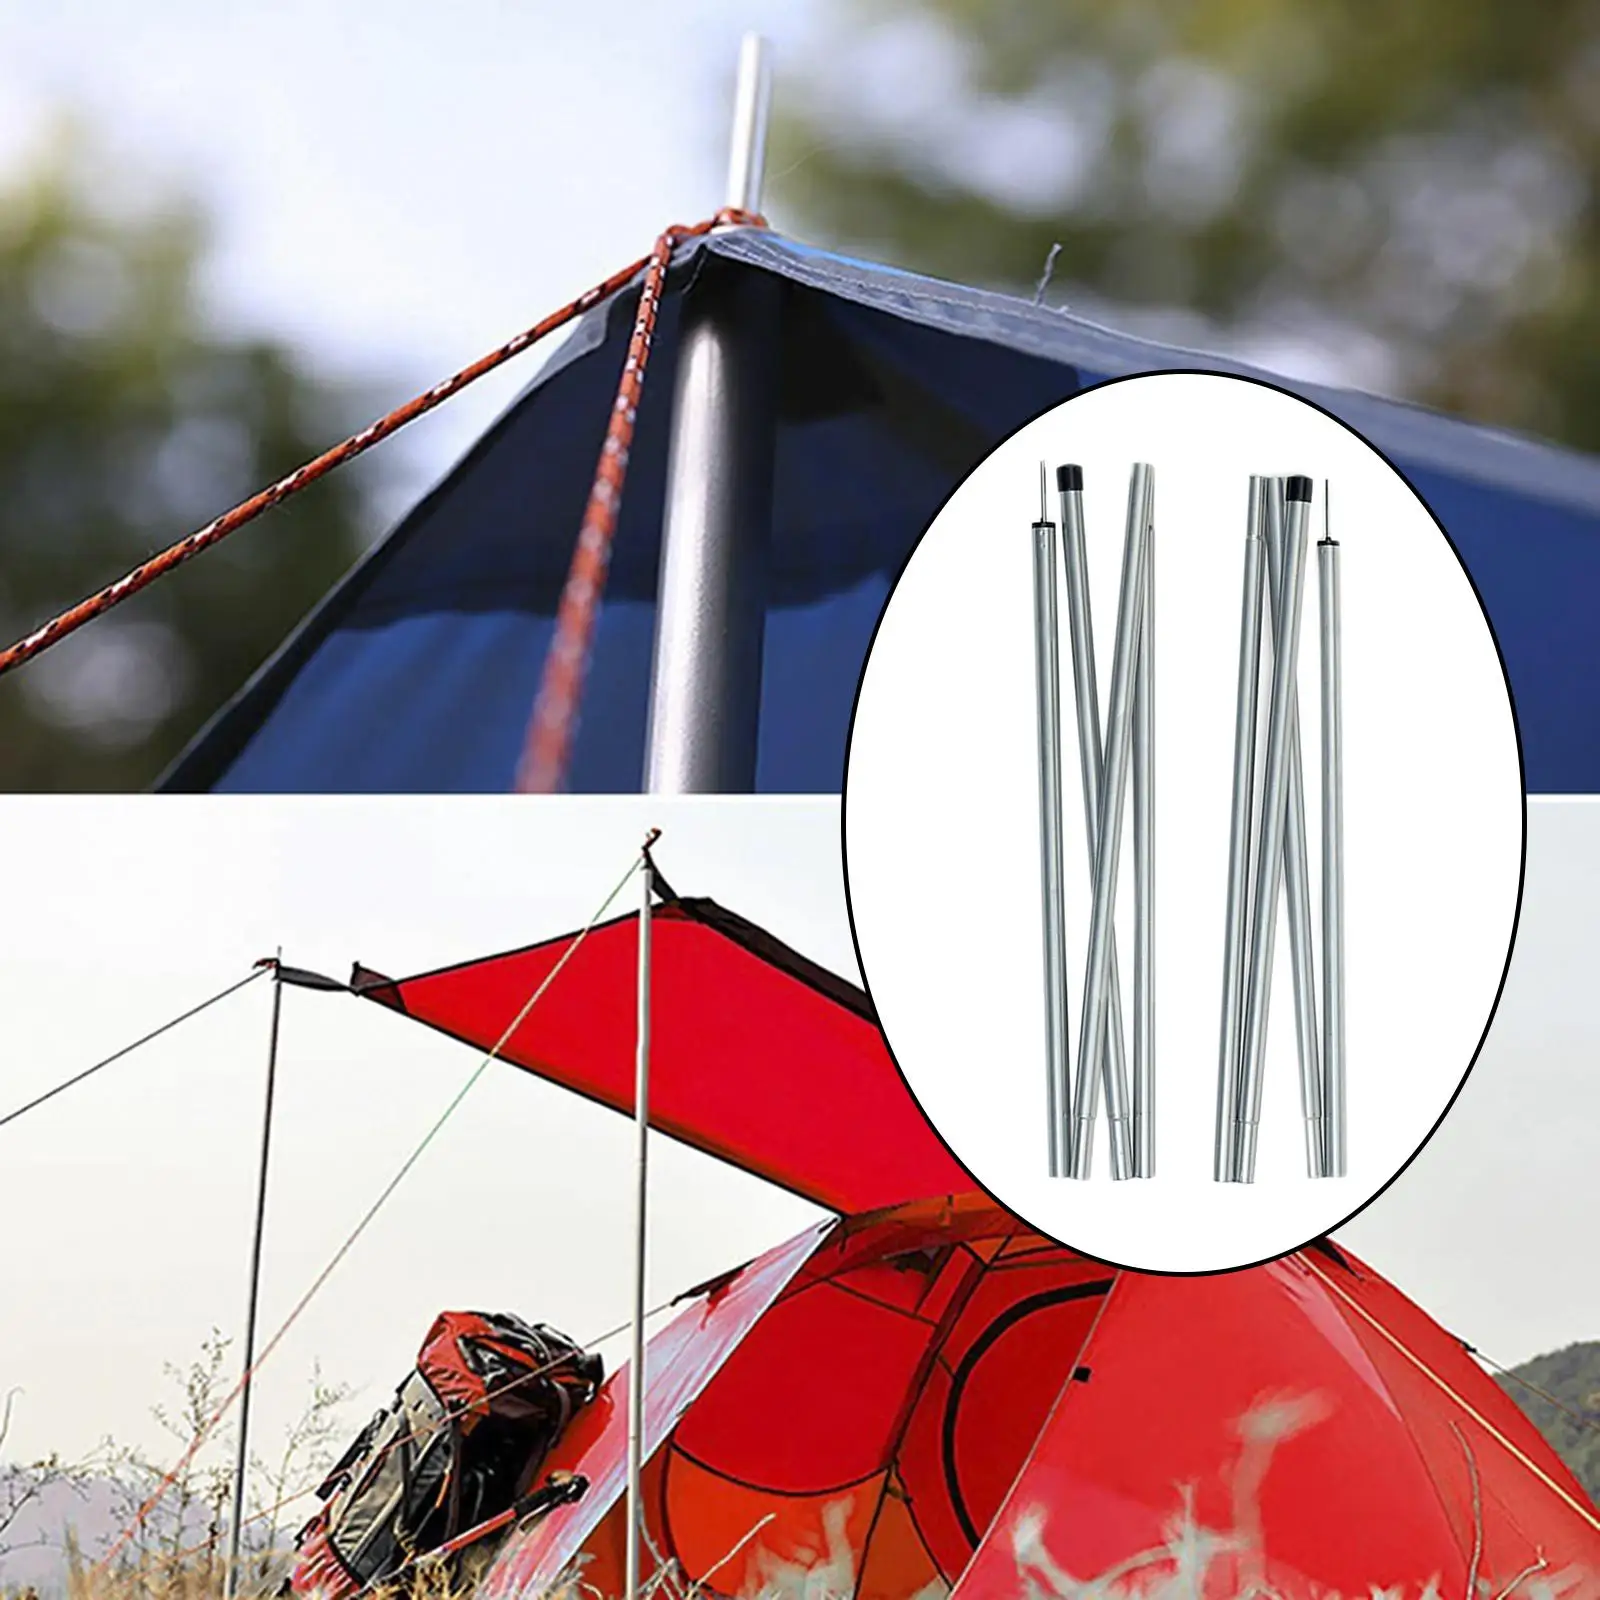 8x Telescopic Tent Tarp Poles Camping 55cm Hammocks Holder Awning Support Replacement Rod Stick Bar for Canopy Tent Fly Rainfly